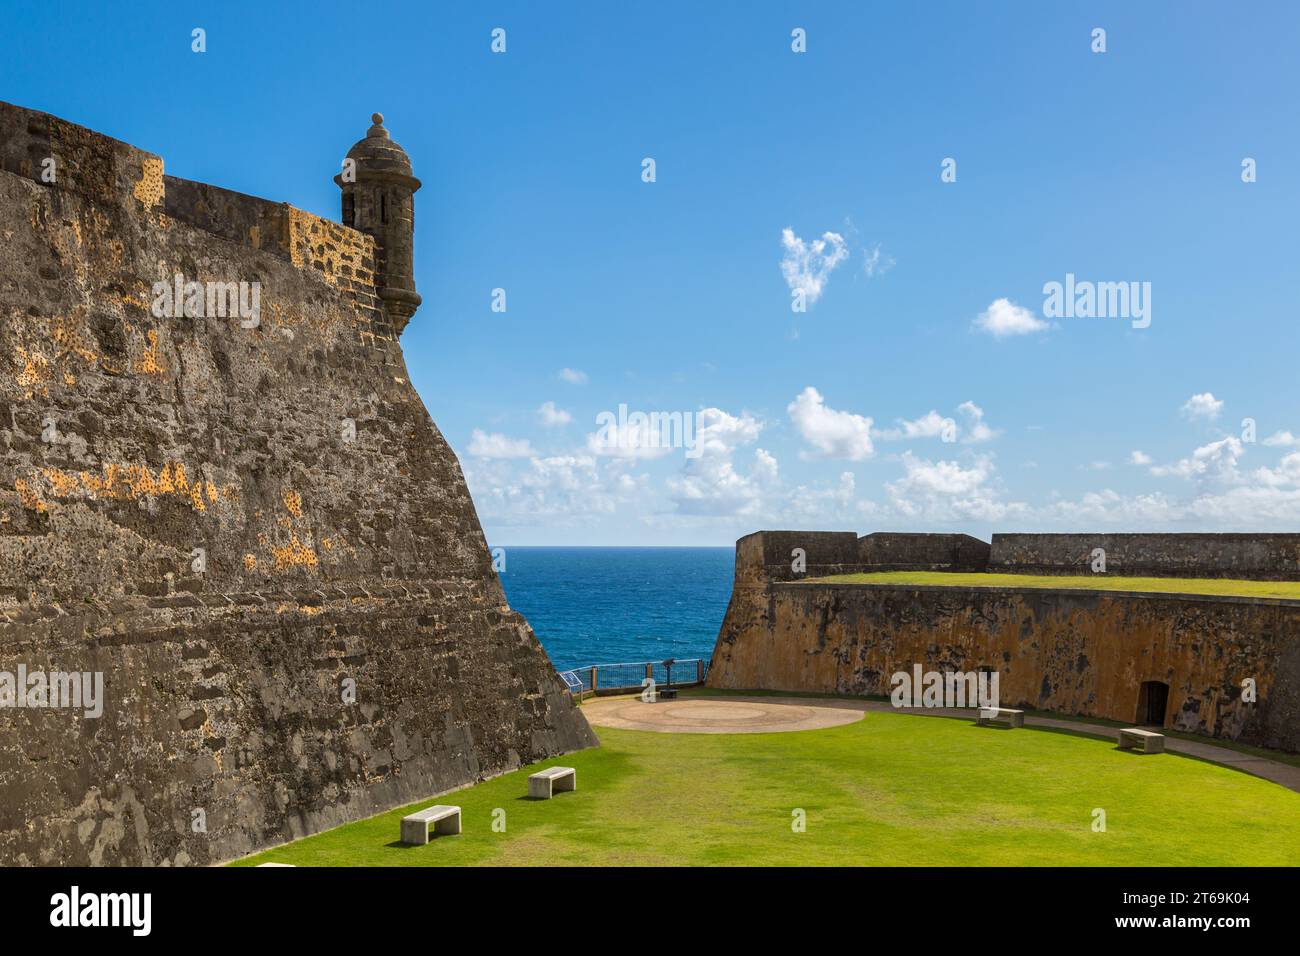 Benches and a green lawn inside Castillo San Cristobal fort in San Juan, Puerto Rico Stock Photo